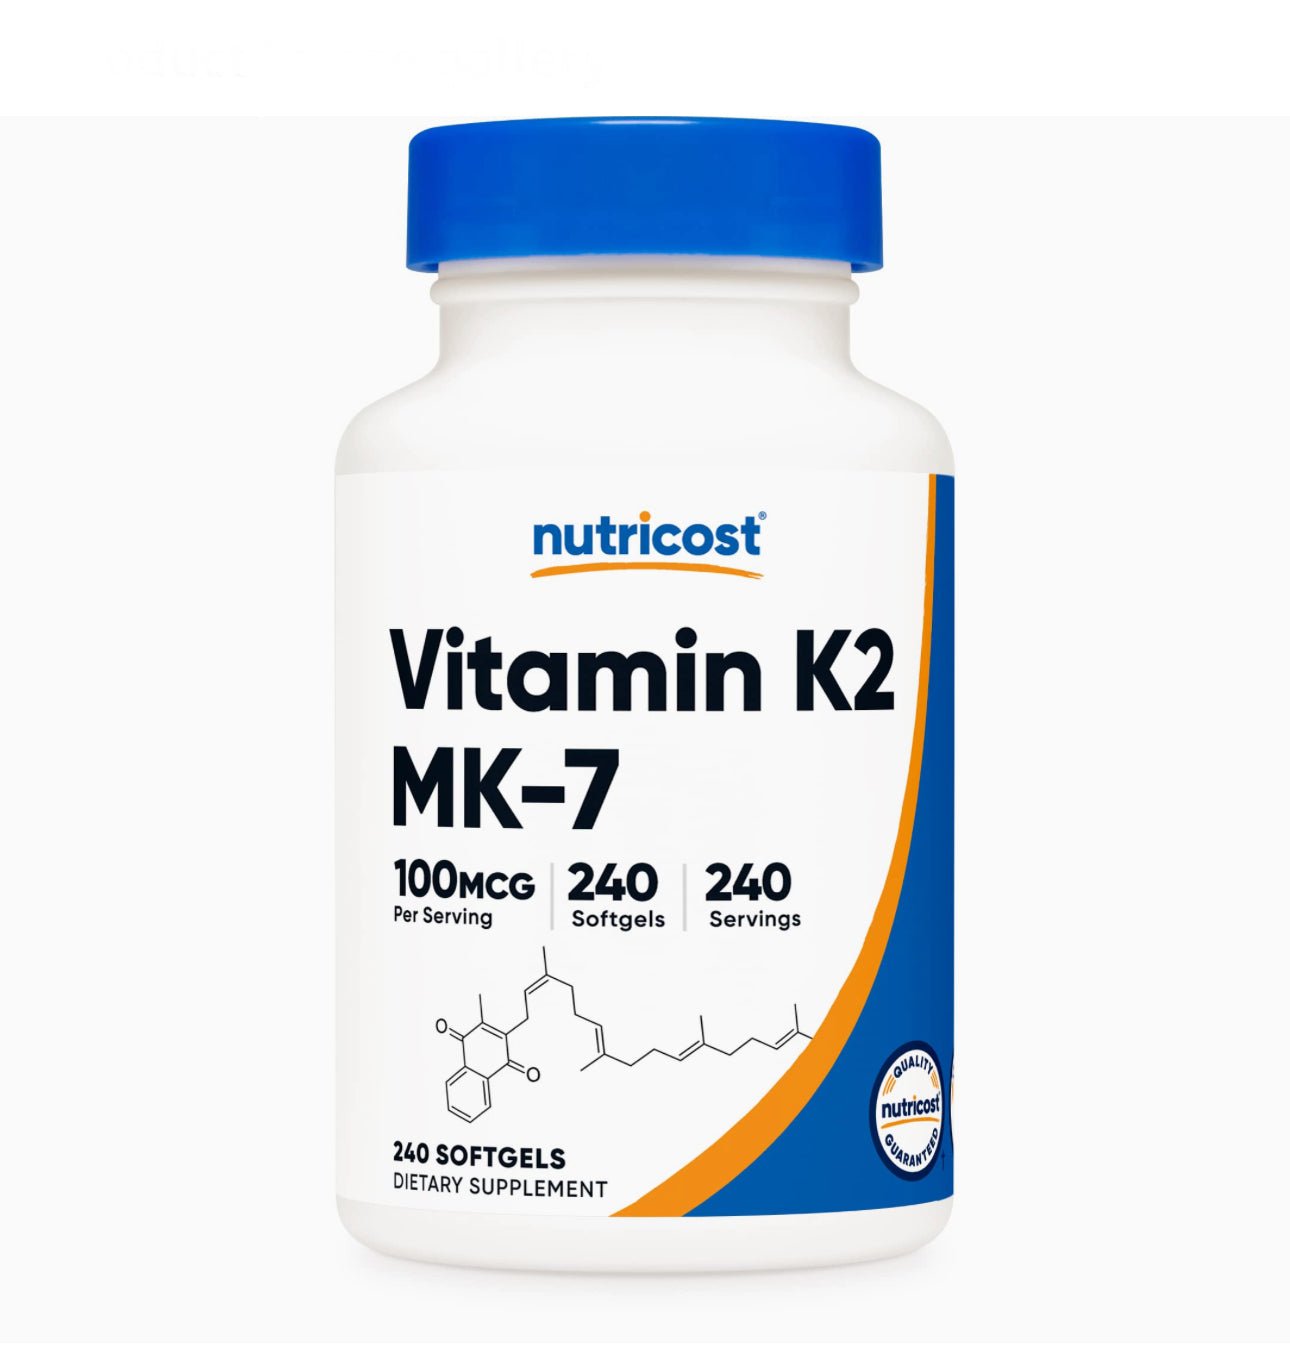 Nutricost Vitamin K2 MK-7 100 mcg | 240 Servings | 240 Softgels Exp 02/2027 - Ome's Beauty Mart